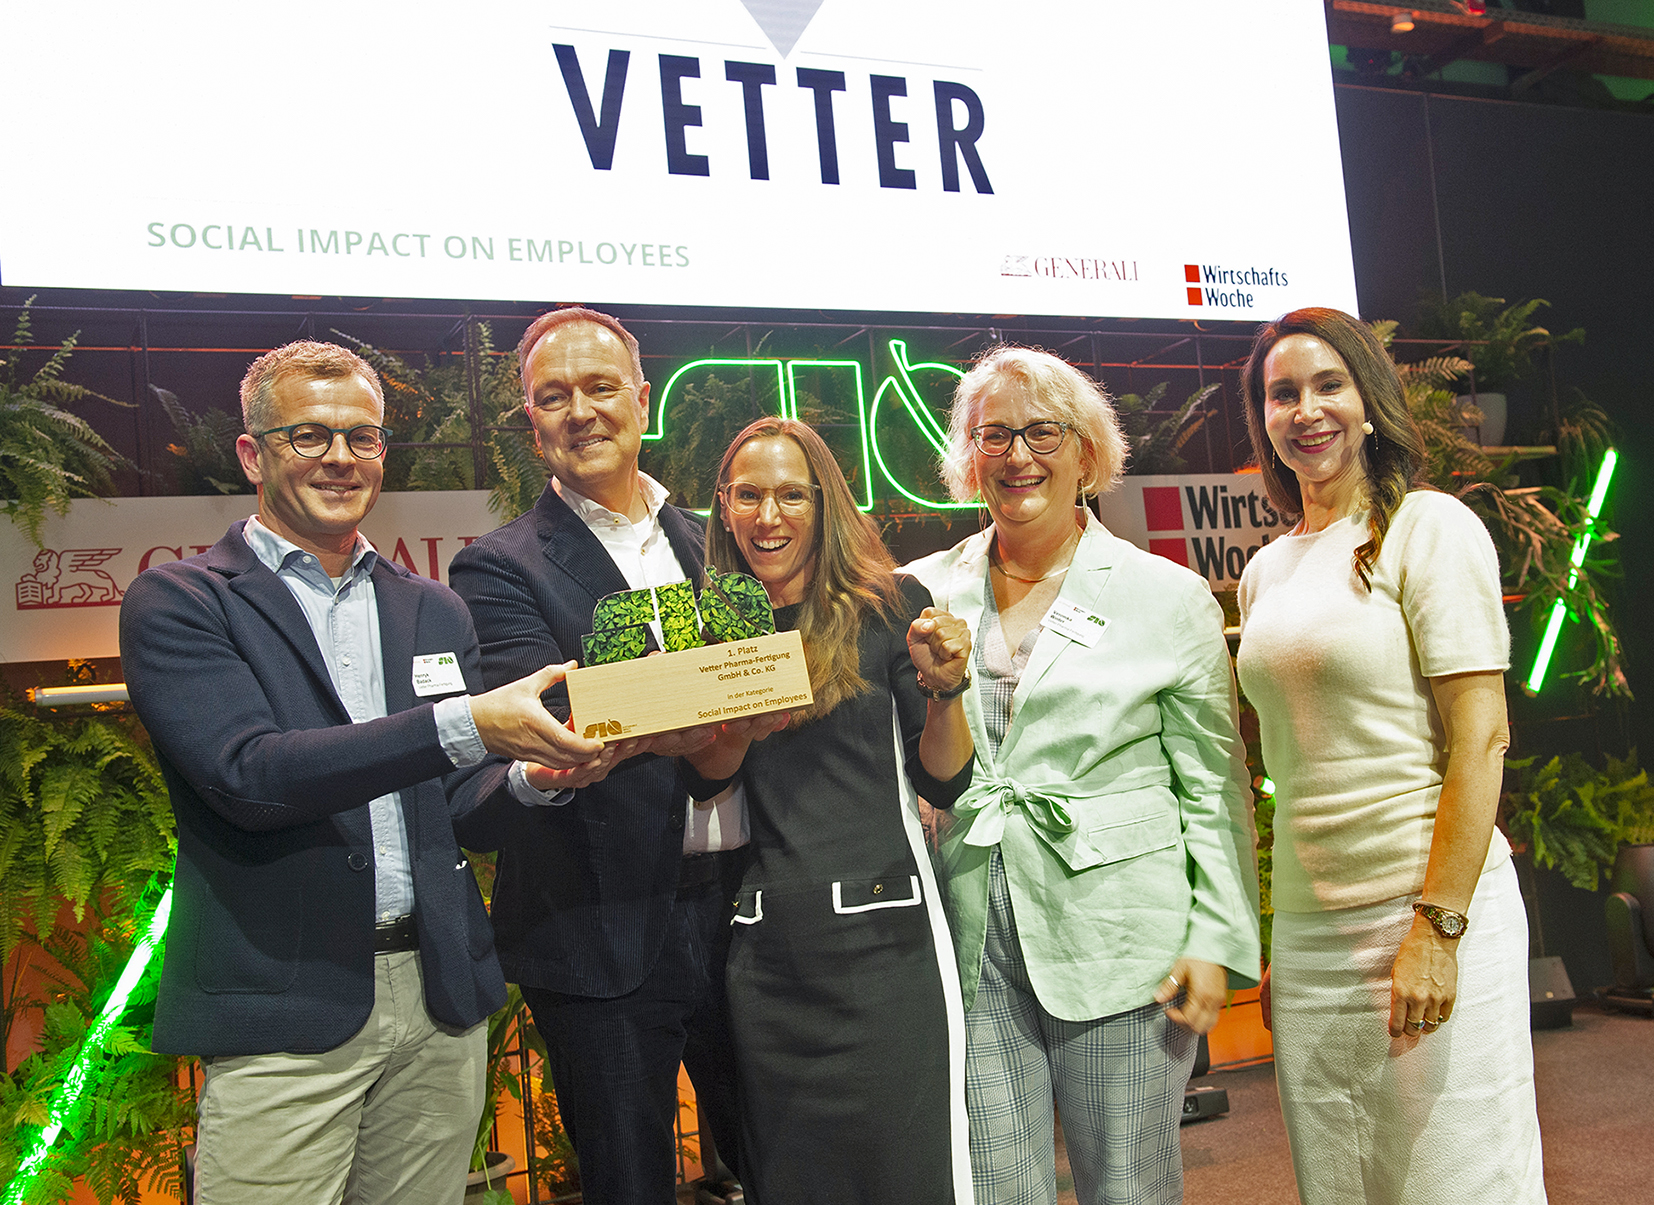 Ceremonial presentation of the Sustainable Impact Award 2022 to Vetter with (from left to right):Henryk Badack (Senior Vice President Technical Services/Internal Project Management), Peter Soelkner (Managing Director), Anke Herrig (Director of HR Development), Veronika Winter (Team Leader Occupational Health Management) and Prof. Dr. Anabel Ternès von Hattburg, Managing Director at International Institute for Sustainability Management (IISM).